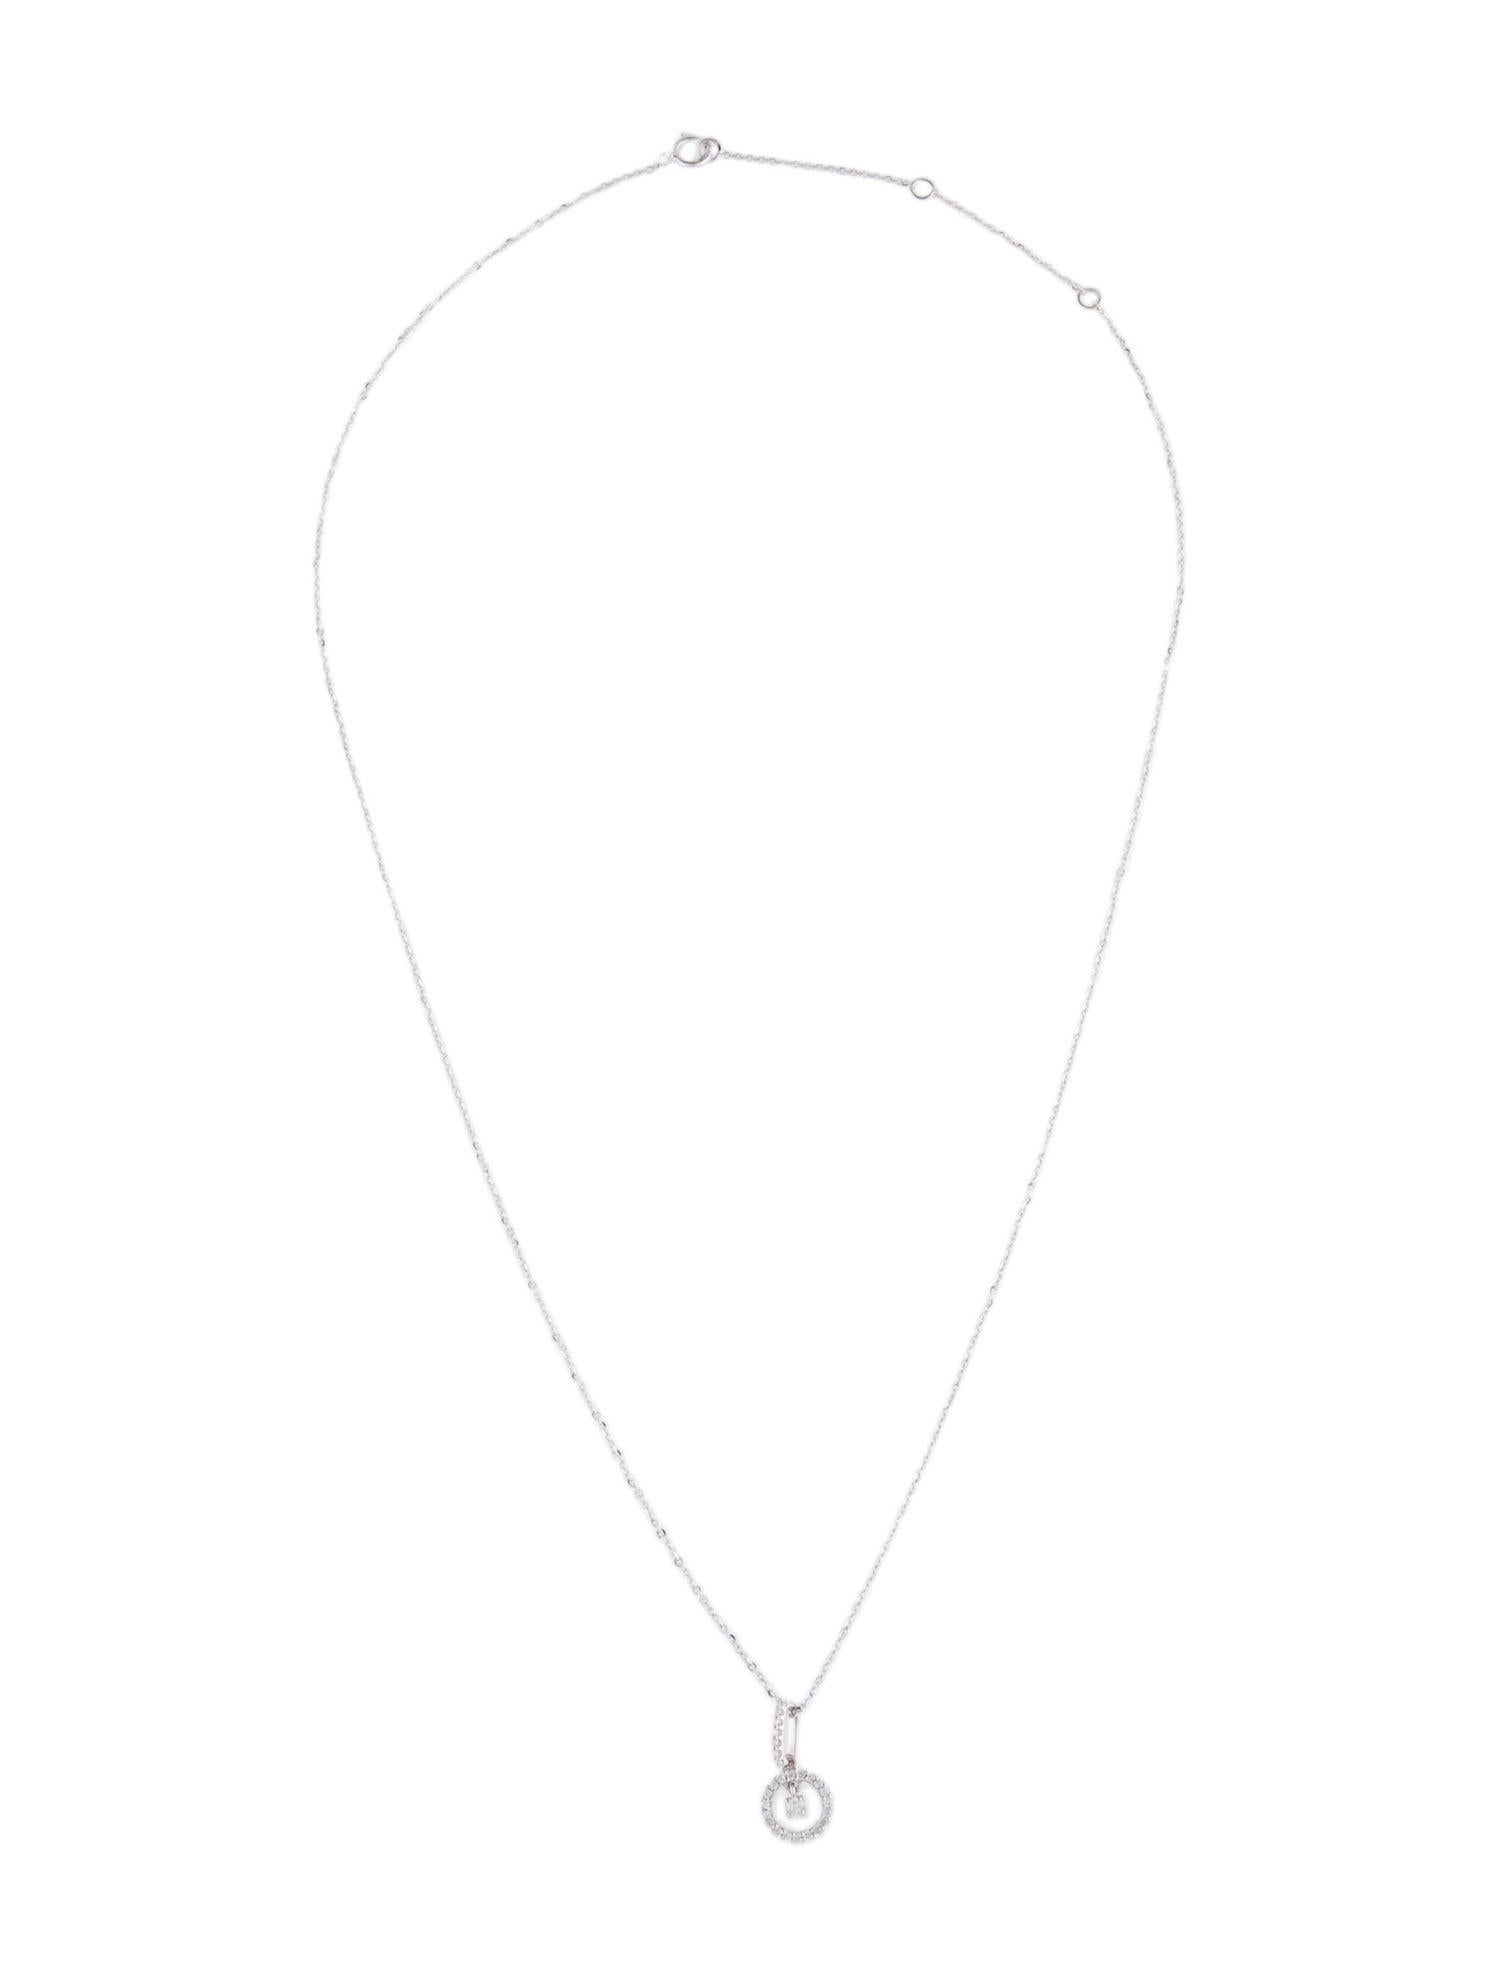 Women's Luxury 14K Diamond Pendant Necklace - Exquisite Statement Piece in White Gold For Sale